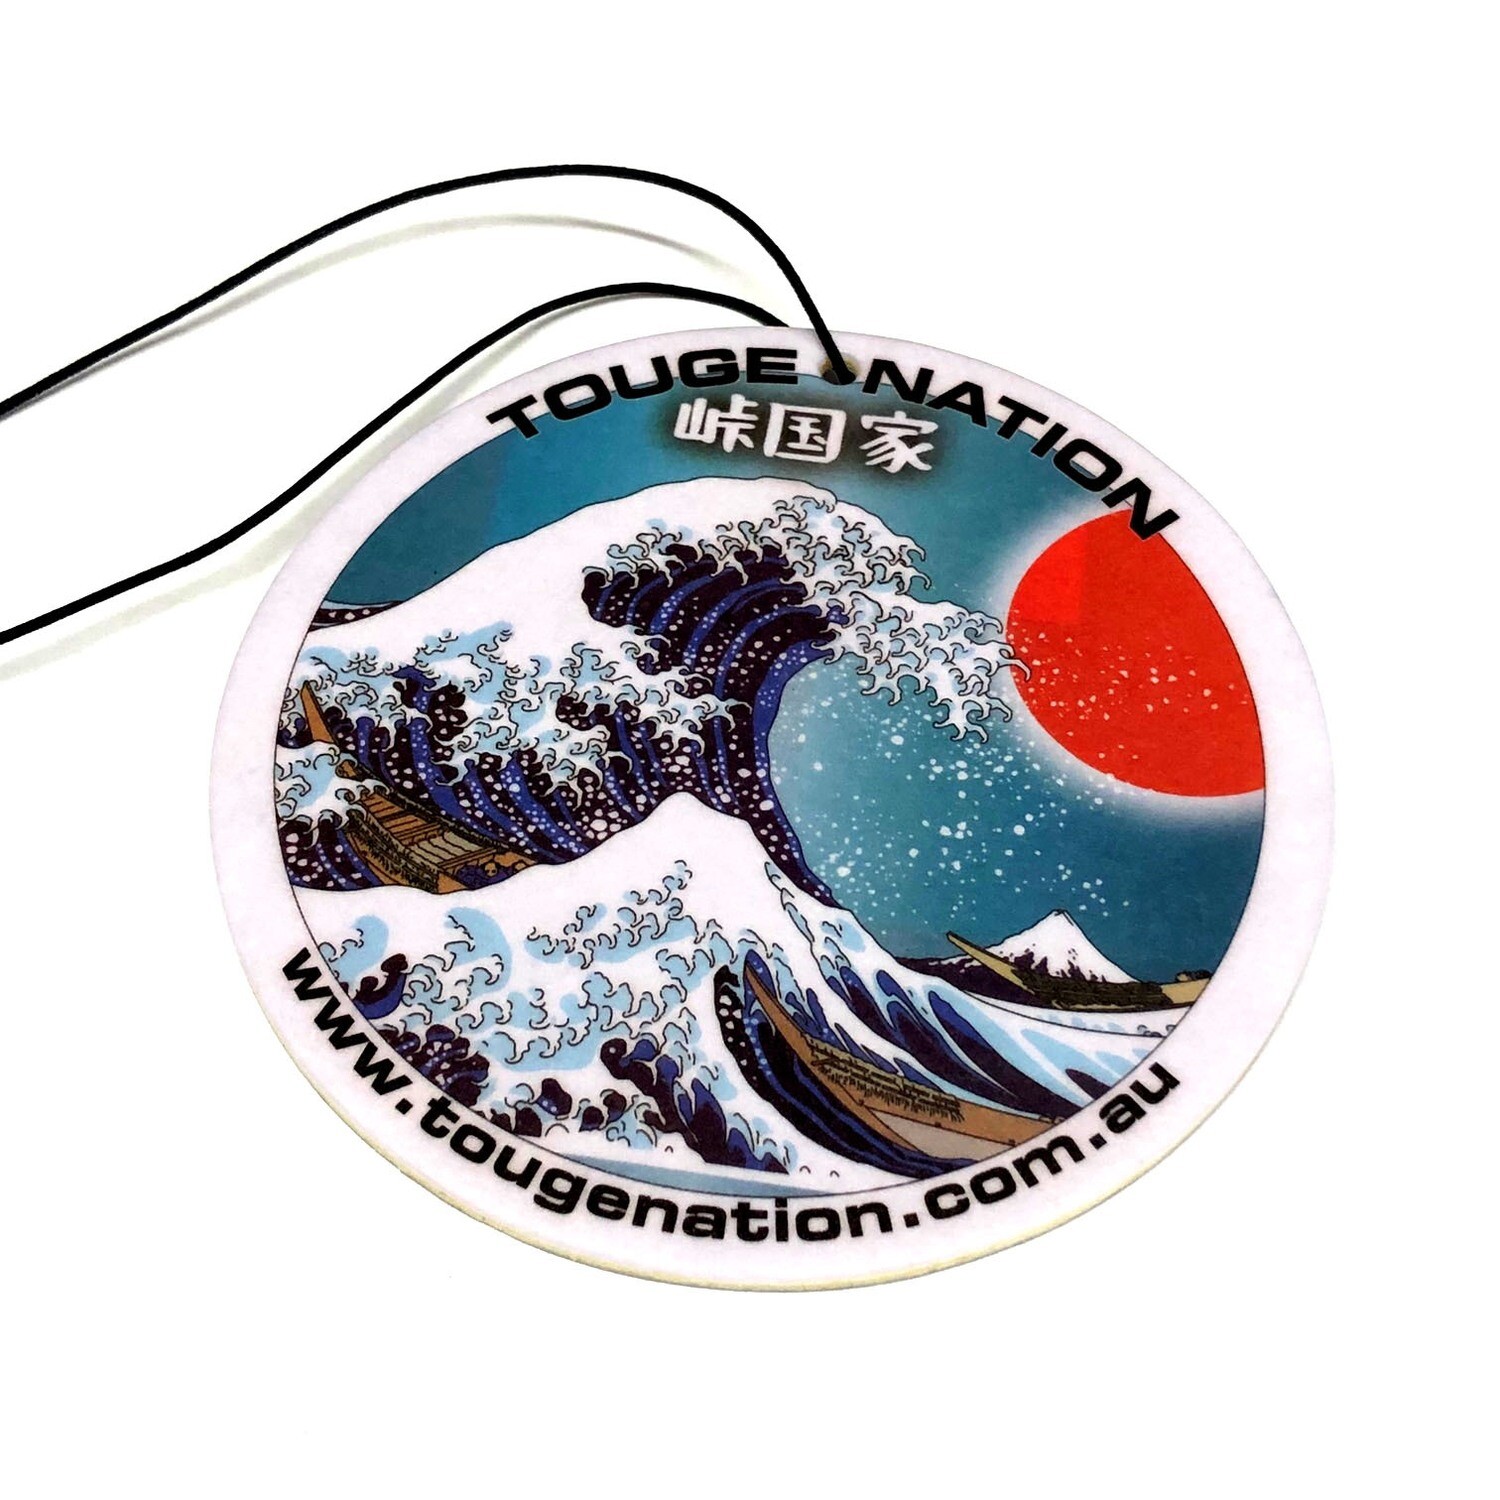 "THE GREAT WAVE" AIR FRESHENER